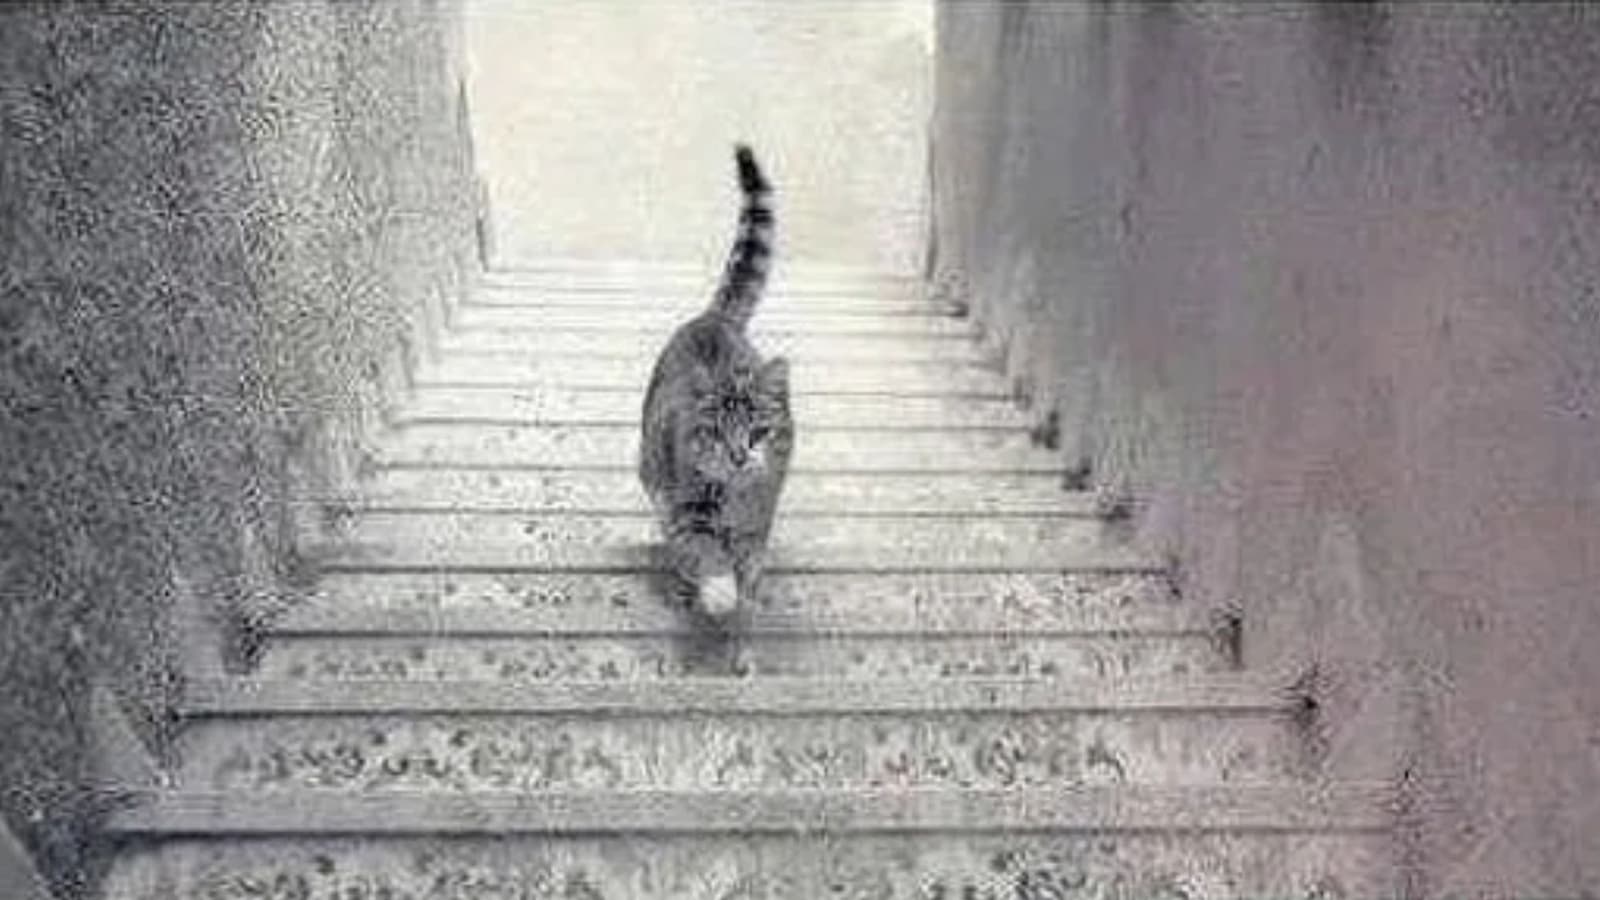 Optical Illusion: Where is this cat going, up or down the stairs ...